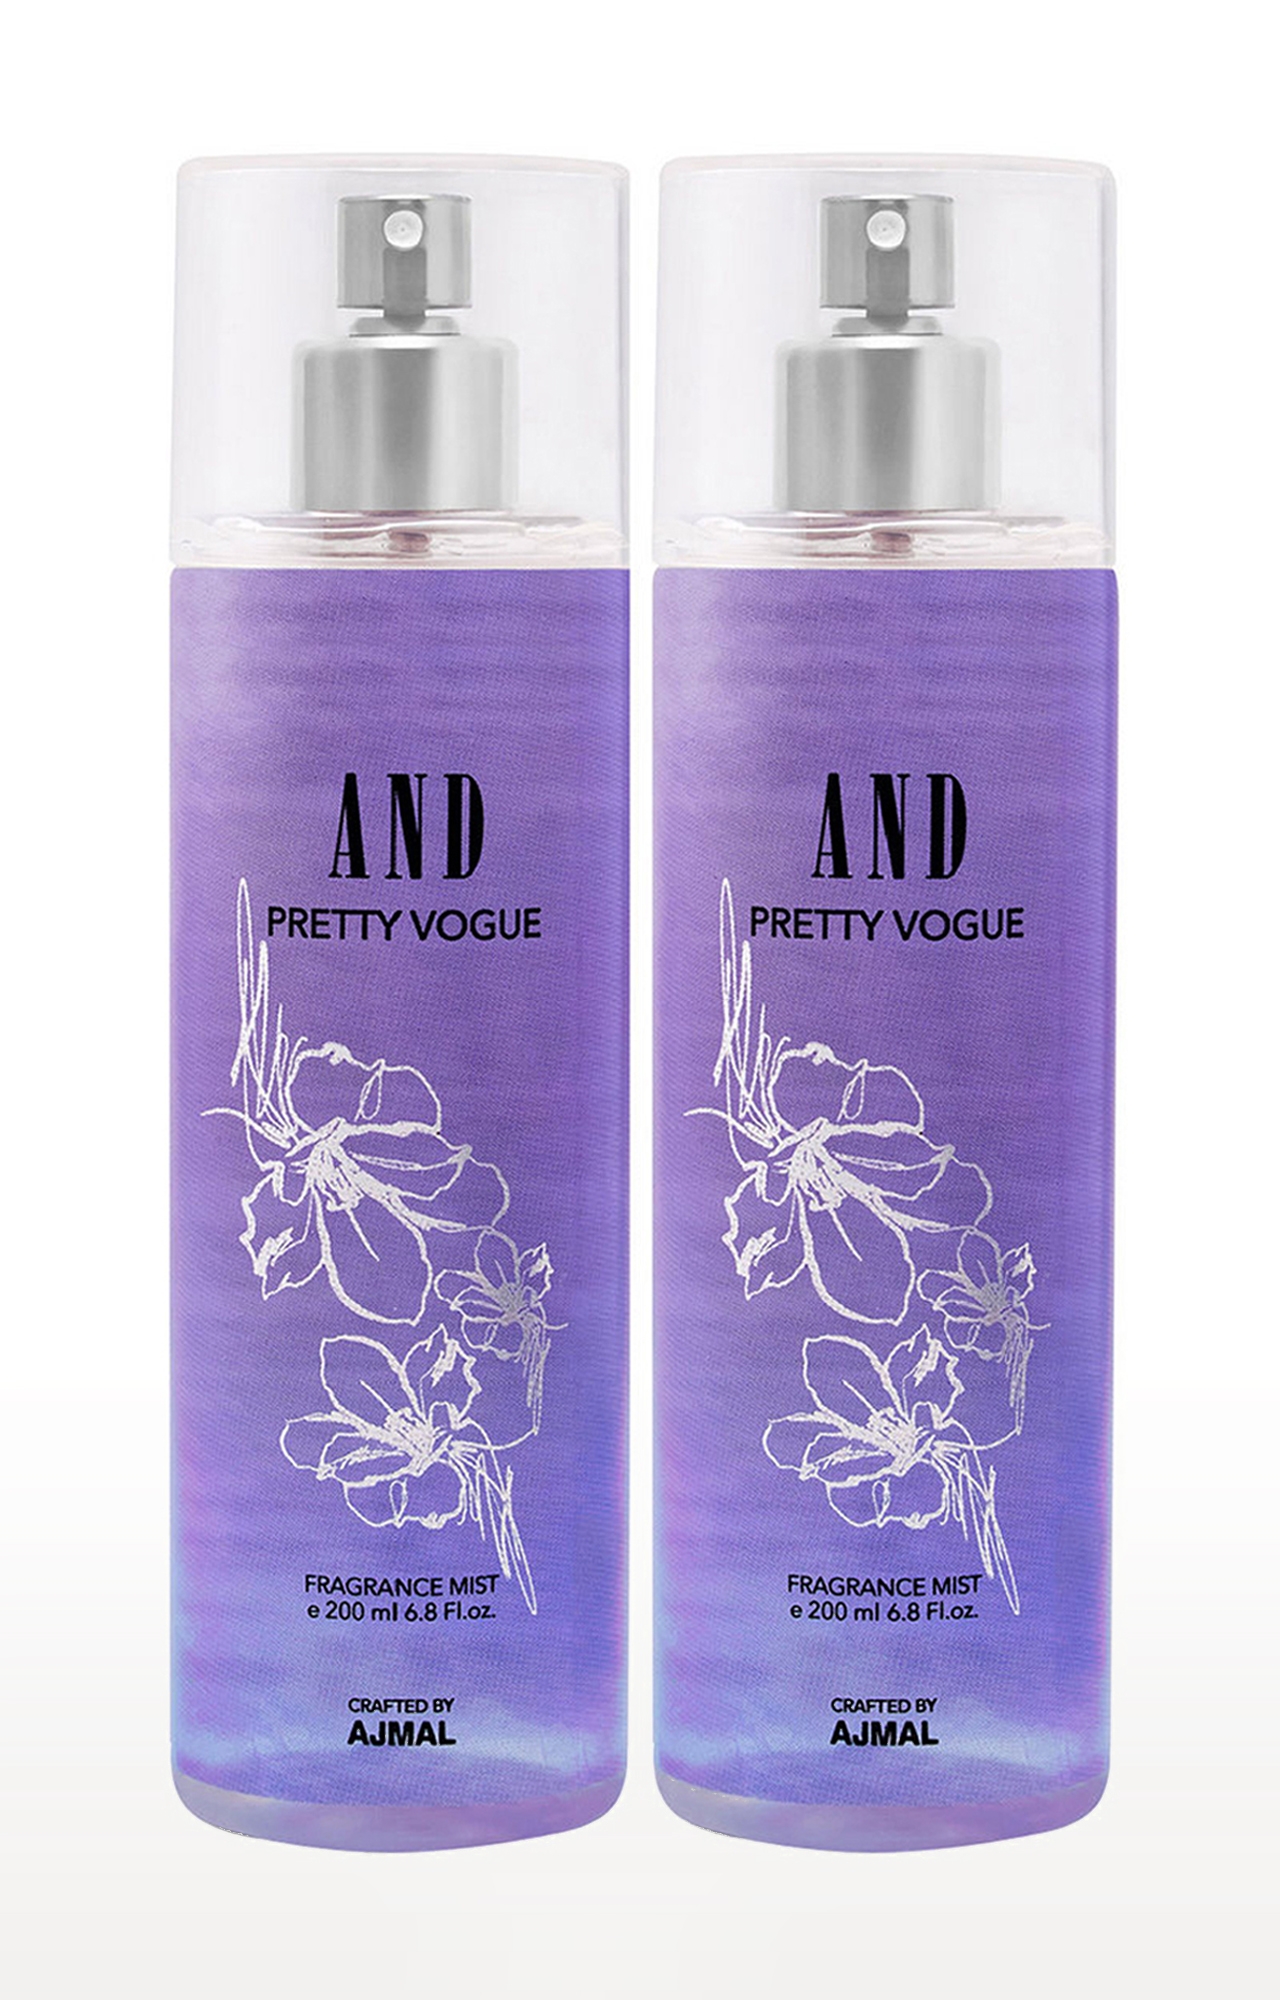 AND Pretty Vogue Pack of 2 Body Mist 200ML each Long Lasting Scent Spray Gift for Women Perfume Crafted by Ajmal FREE